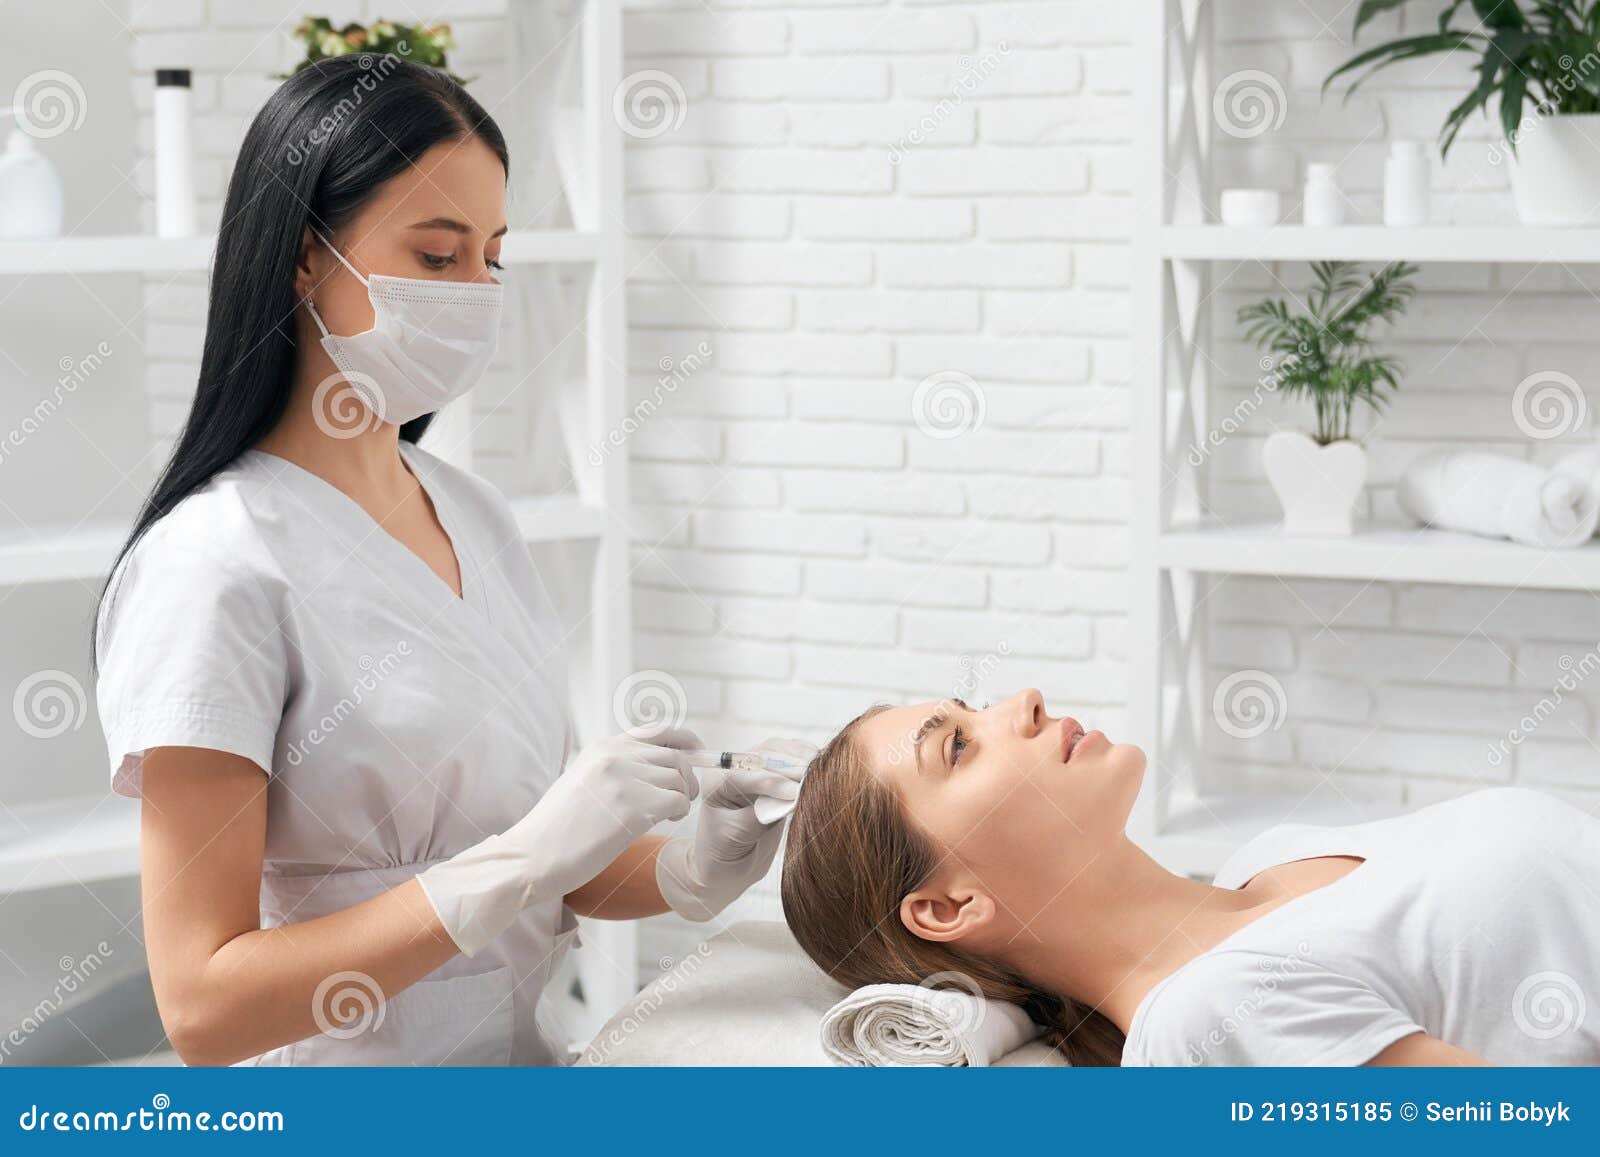 procedure for improvements growth hair in beauty salon.